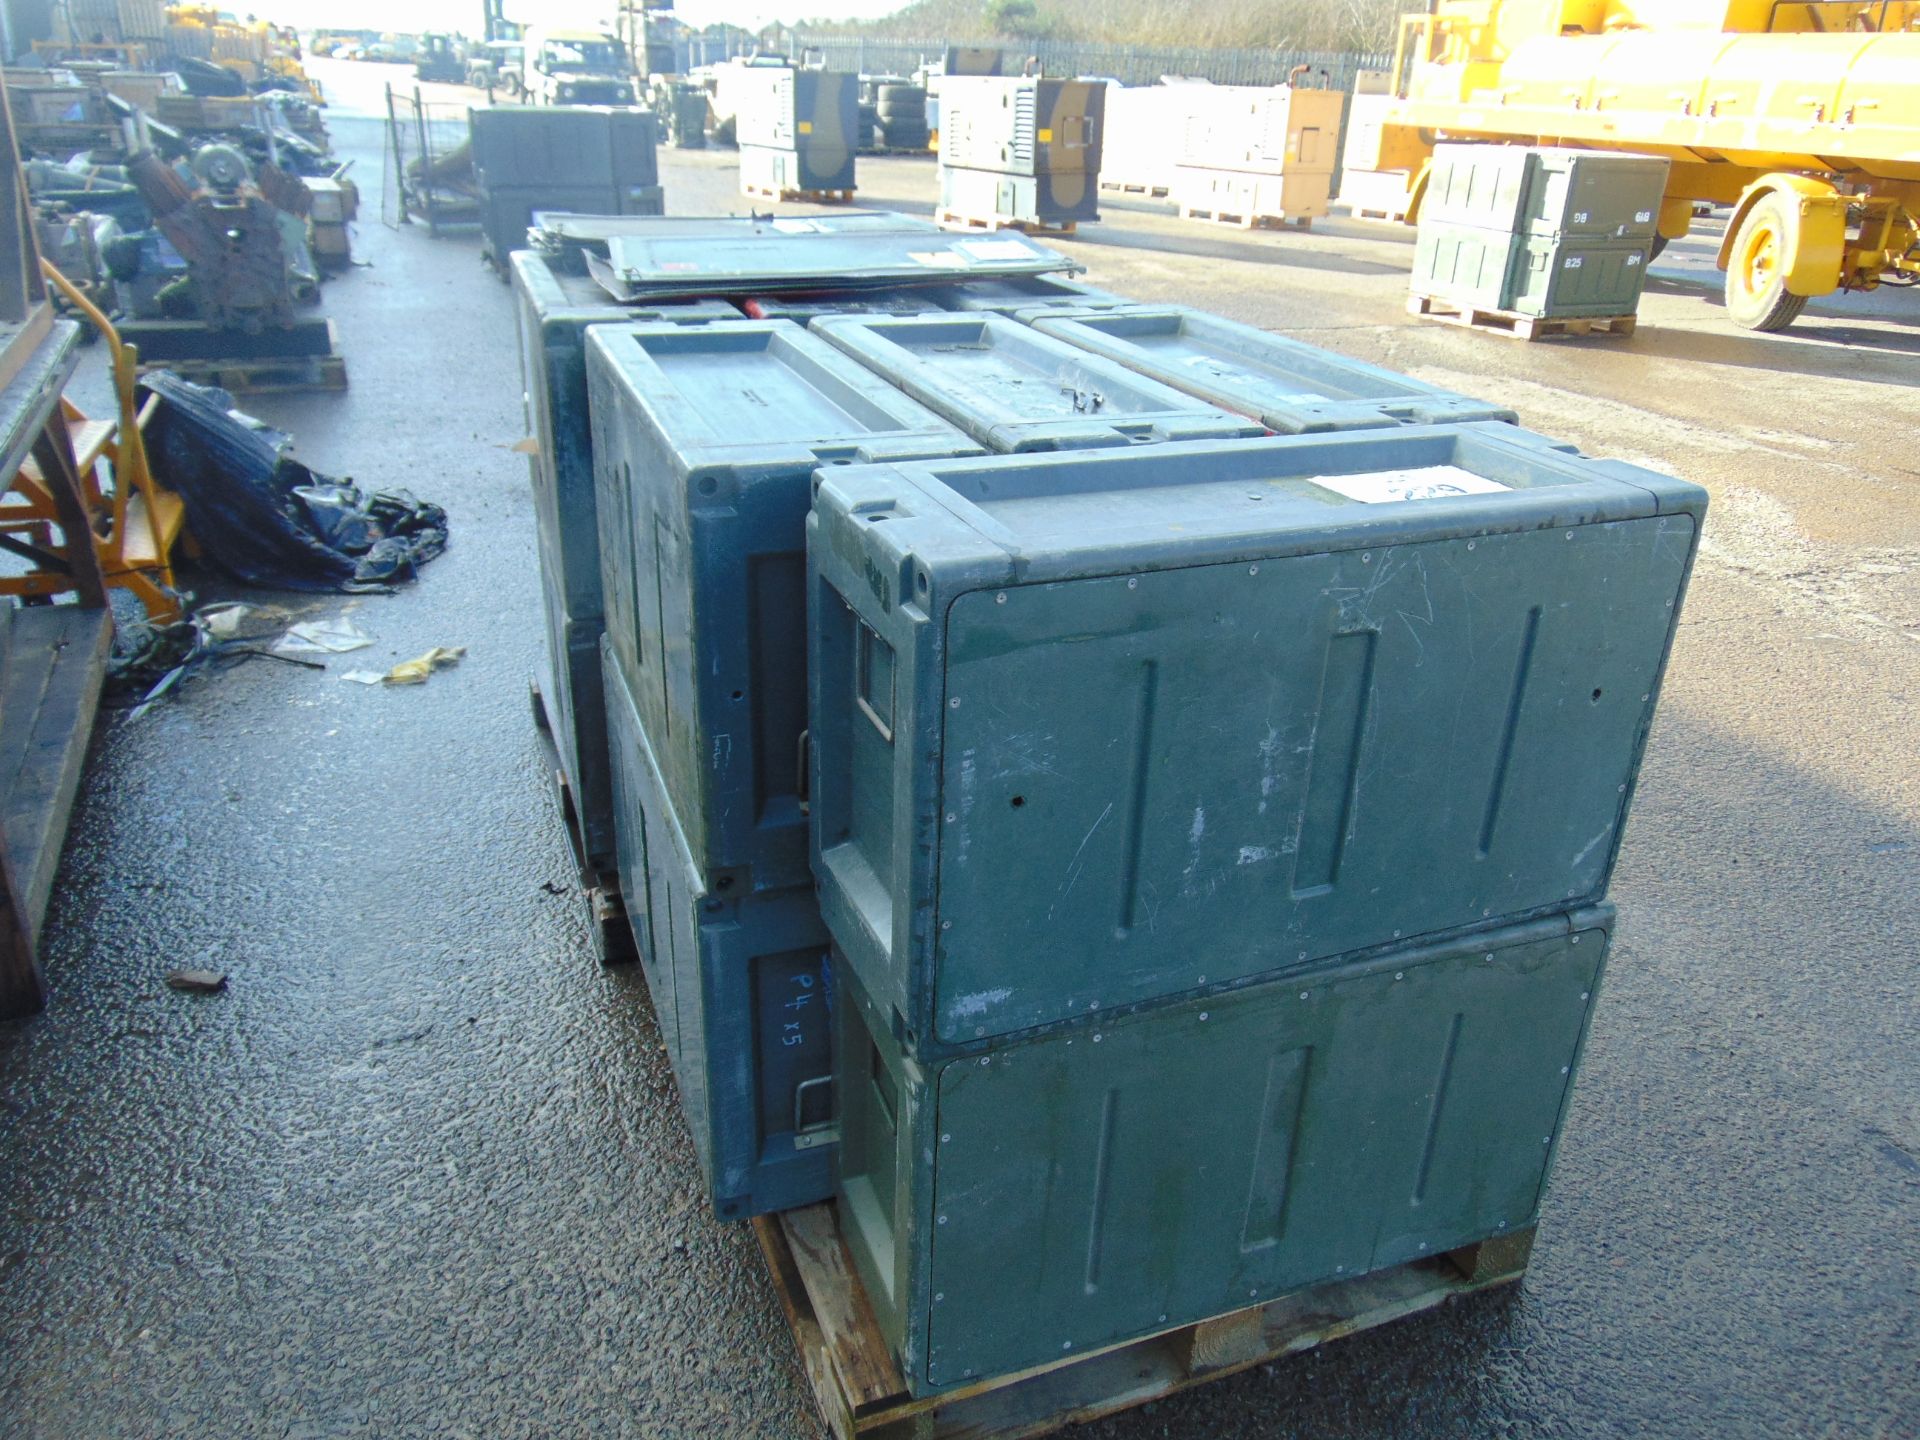 16 x Heavy Duty Interconnecting Storage Boxes With Lids - Image 2 of 7